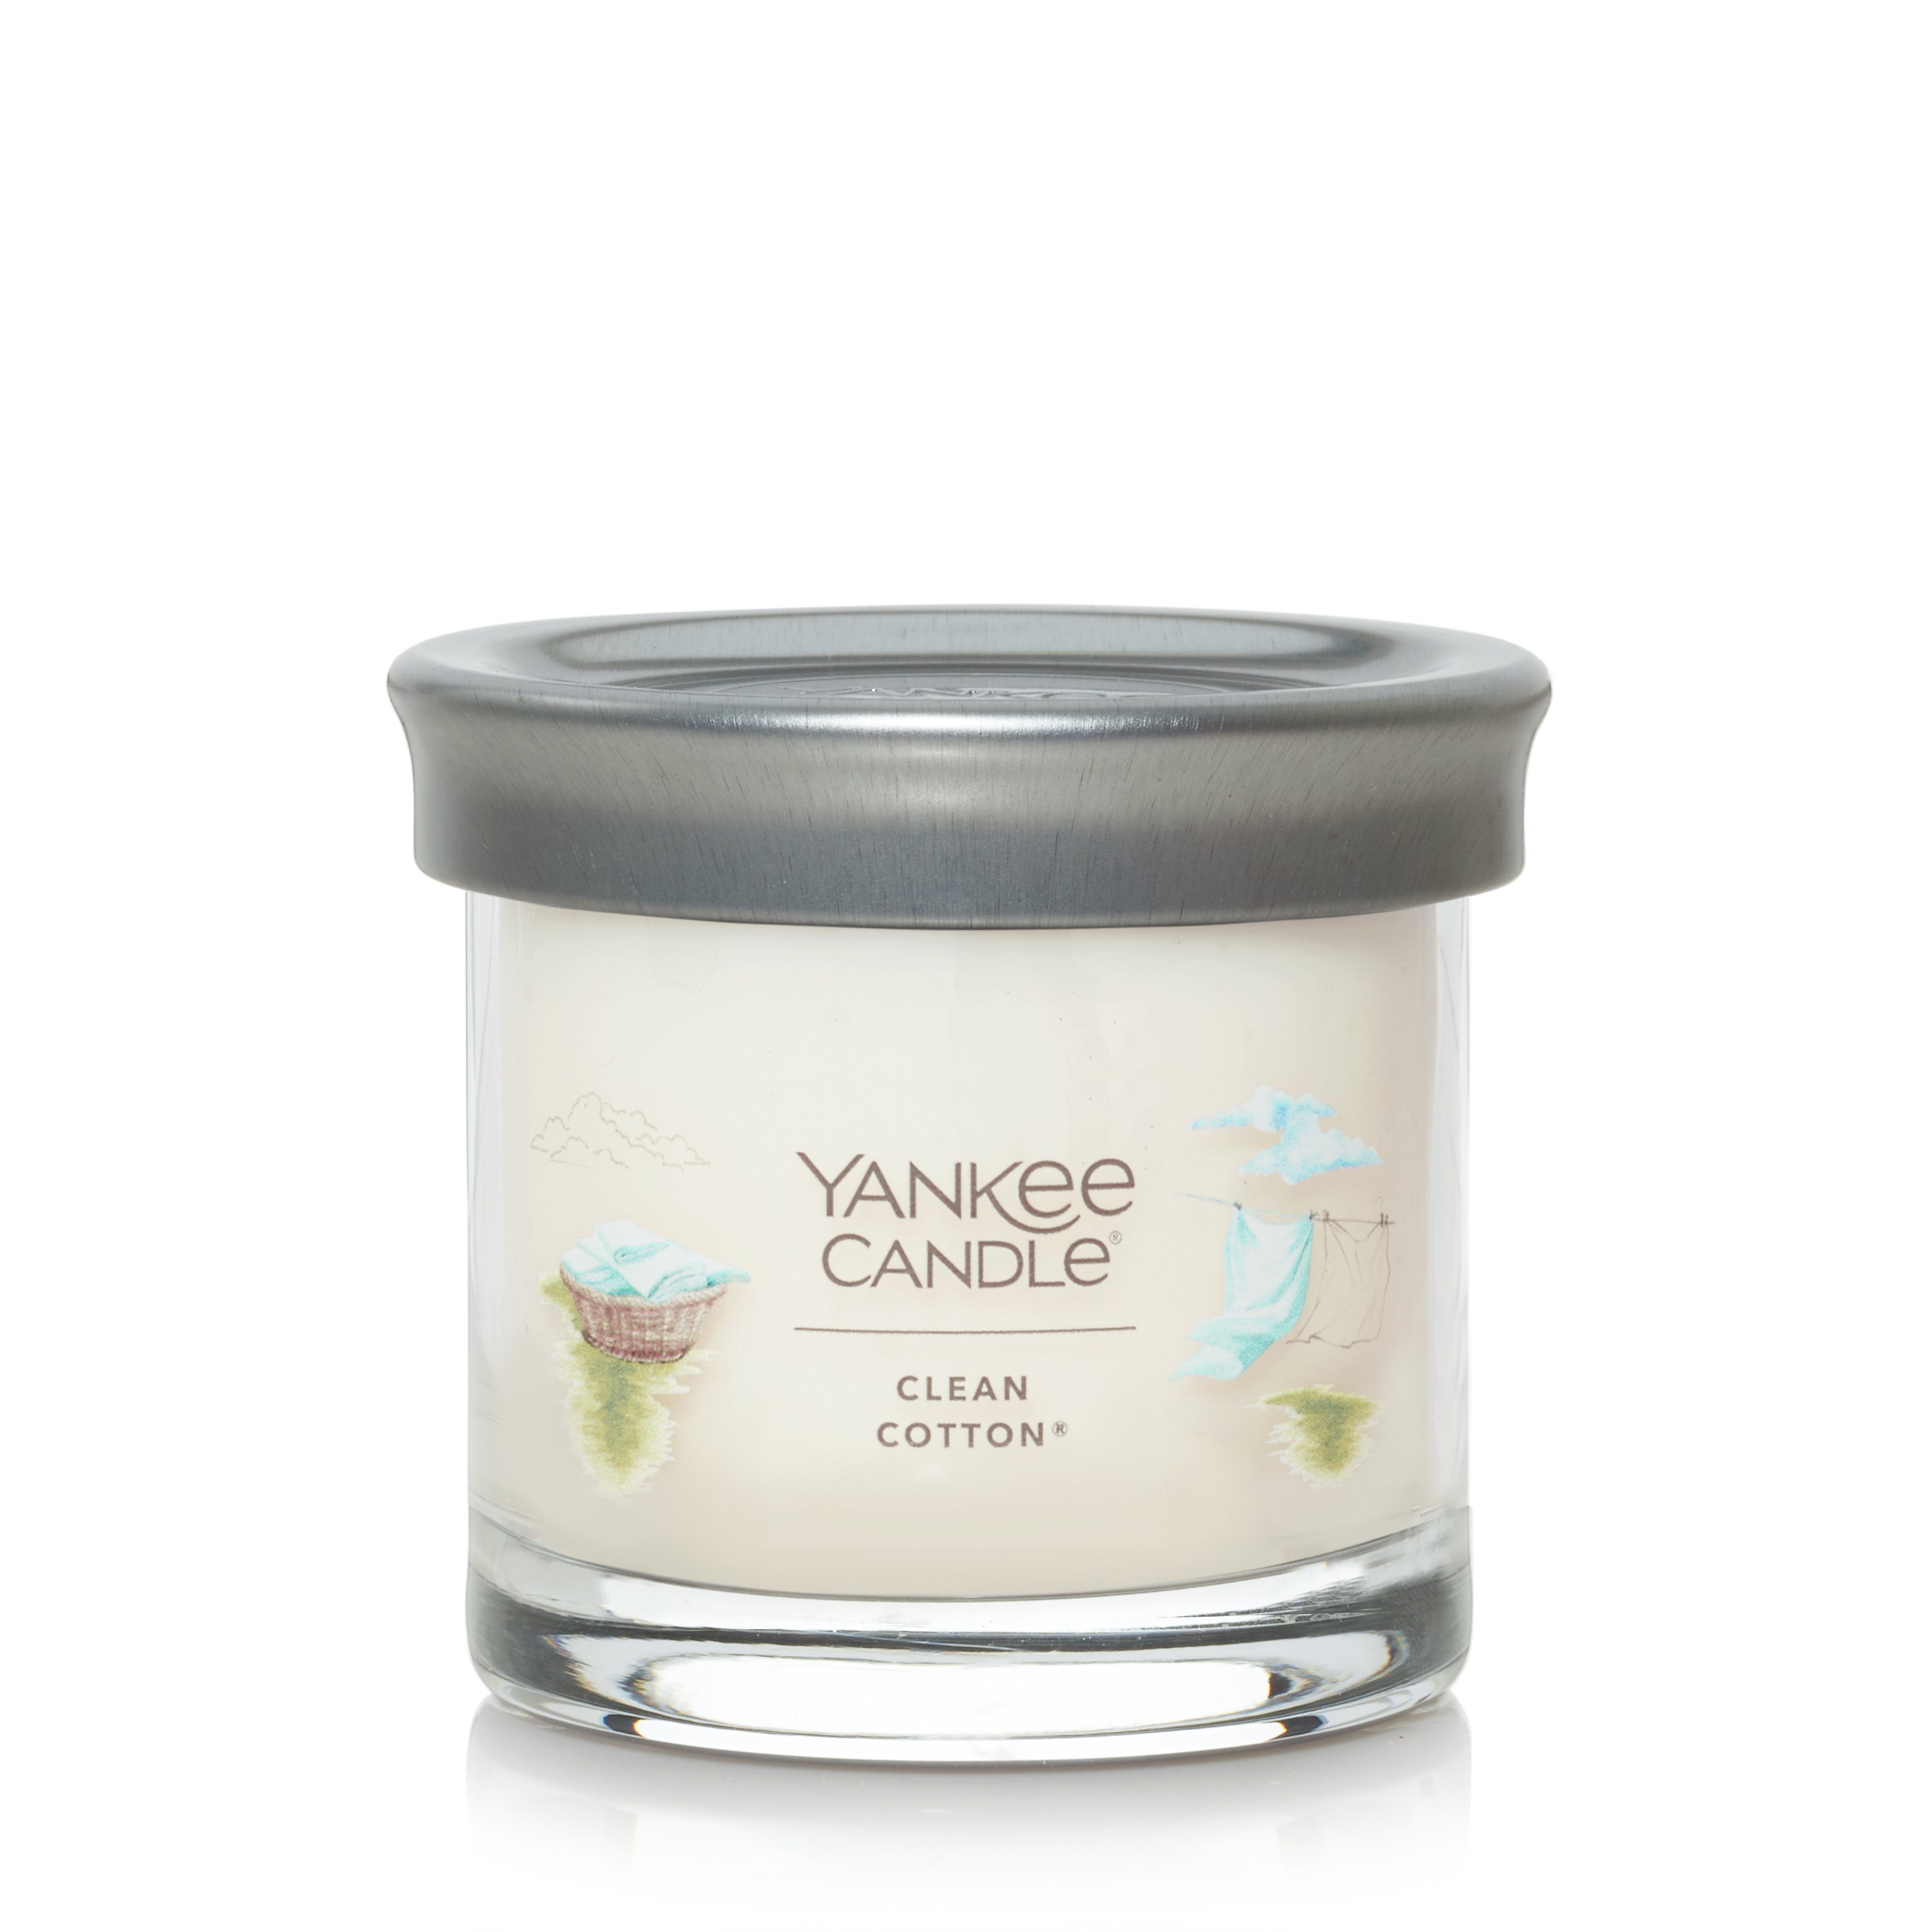 Yankee Candle 2.6 oz Clean Cotton Candle Wax Melts - 1585155